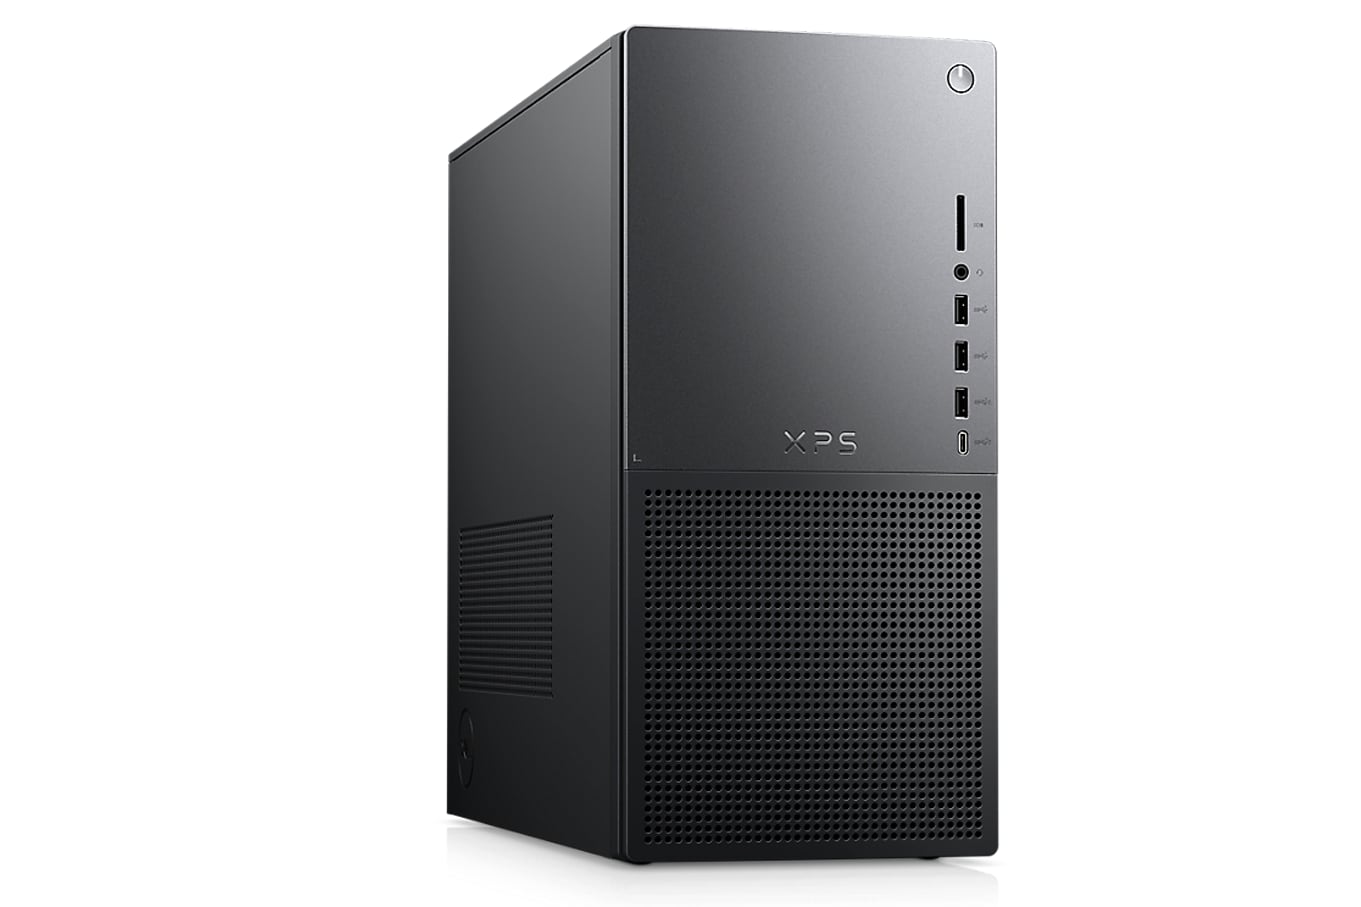 DELL デル Dell XPS 8960 Tower Desktop Computer 13th Gen Intel Core i7-13700  16-Core up to 5.20 GHz CPU, 16GB DDR5 RAM, 1TB NVMe SSD 16TB HDD, 